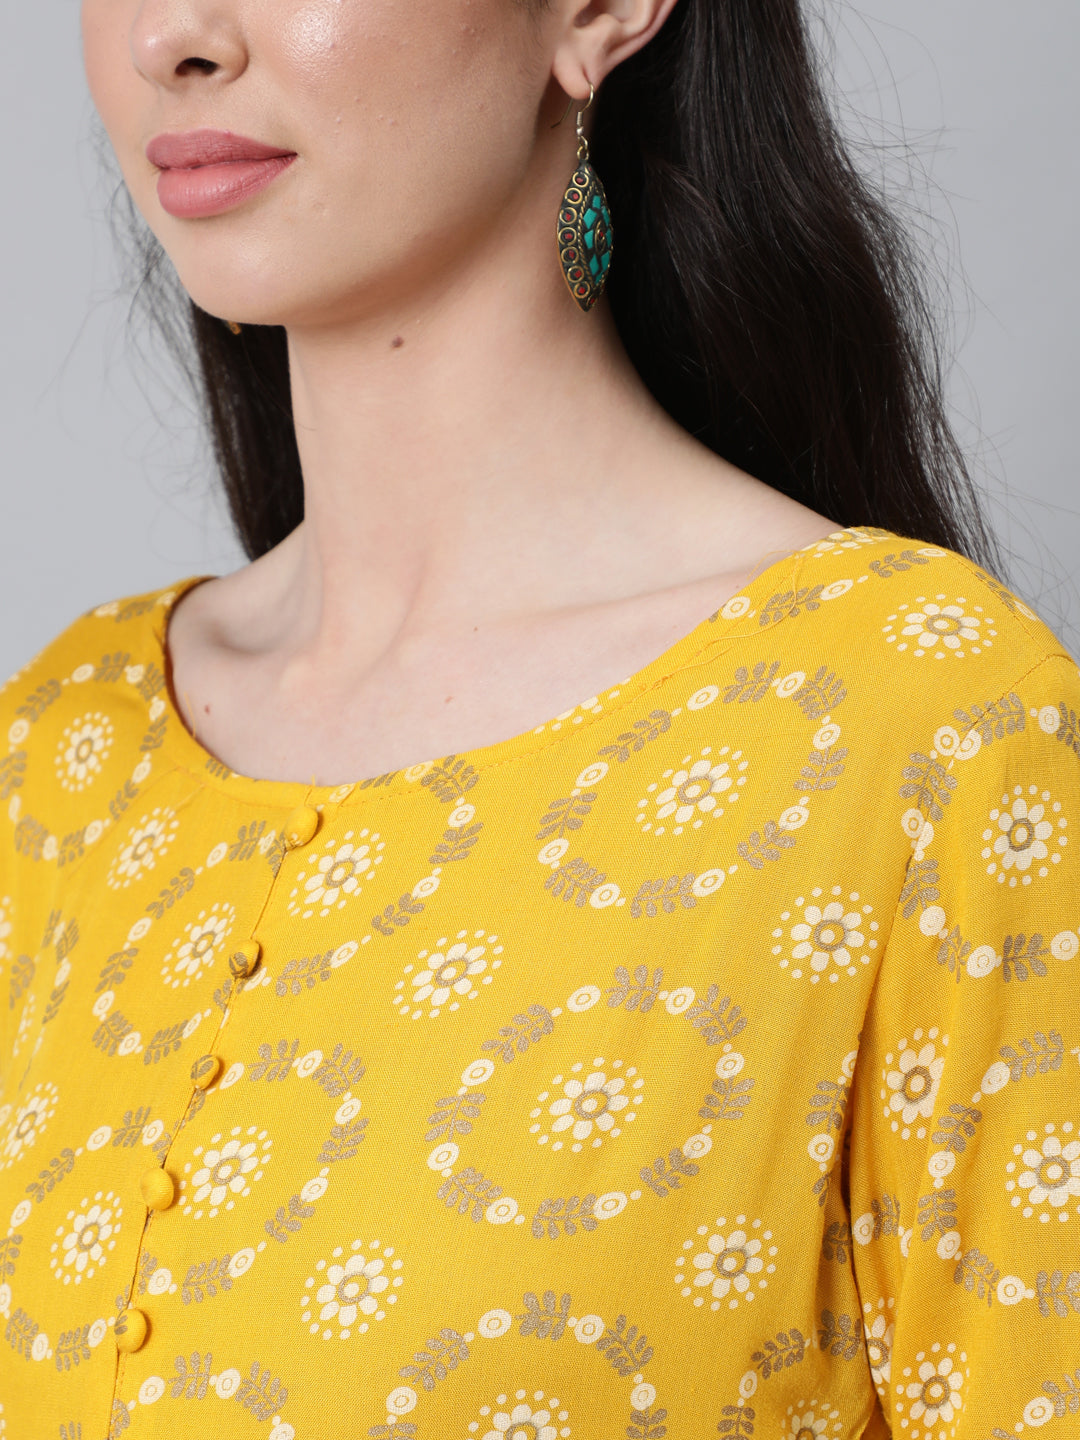 Women's Yellow Ethnic Printed Flared Dress With Three Quarter Sleeves - Nayo Clothing